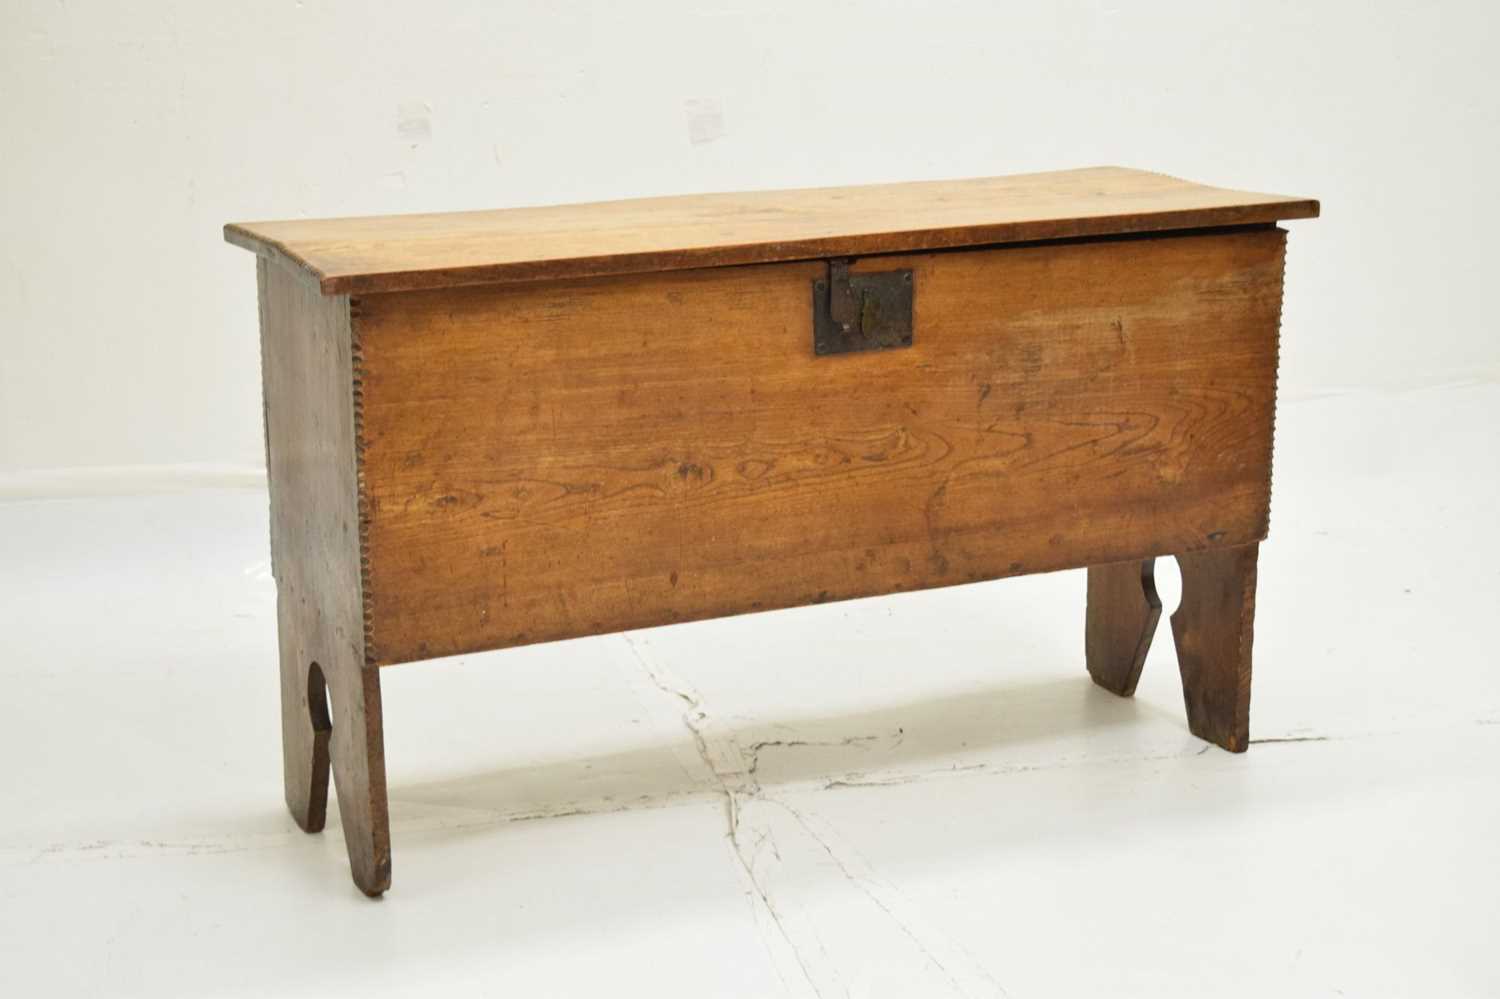 17th century elm six-plank coffer or bedding chest - Image 2 of 6